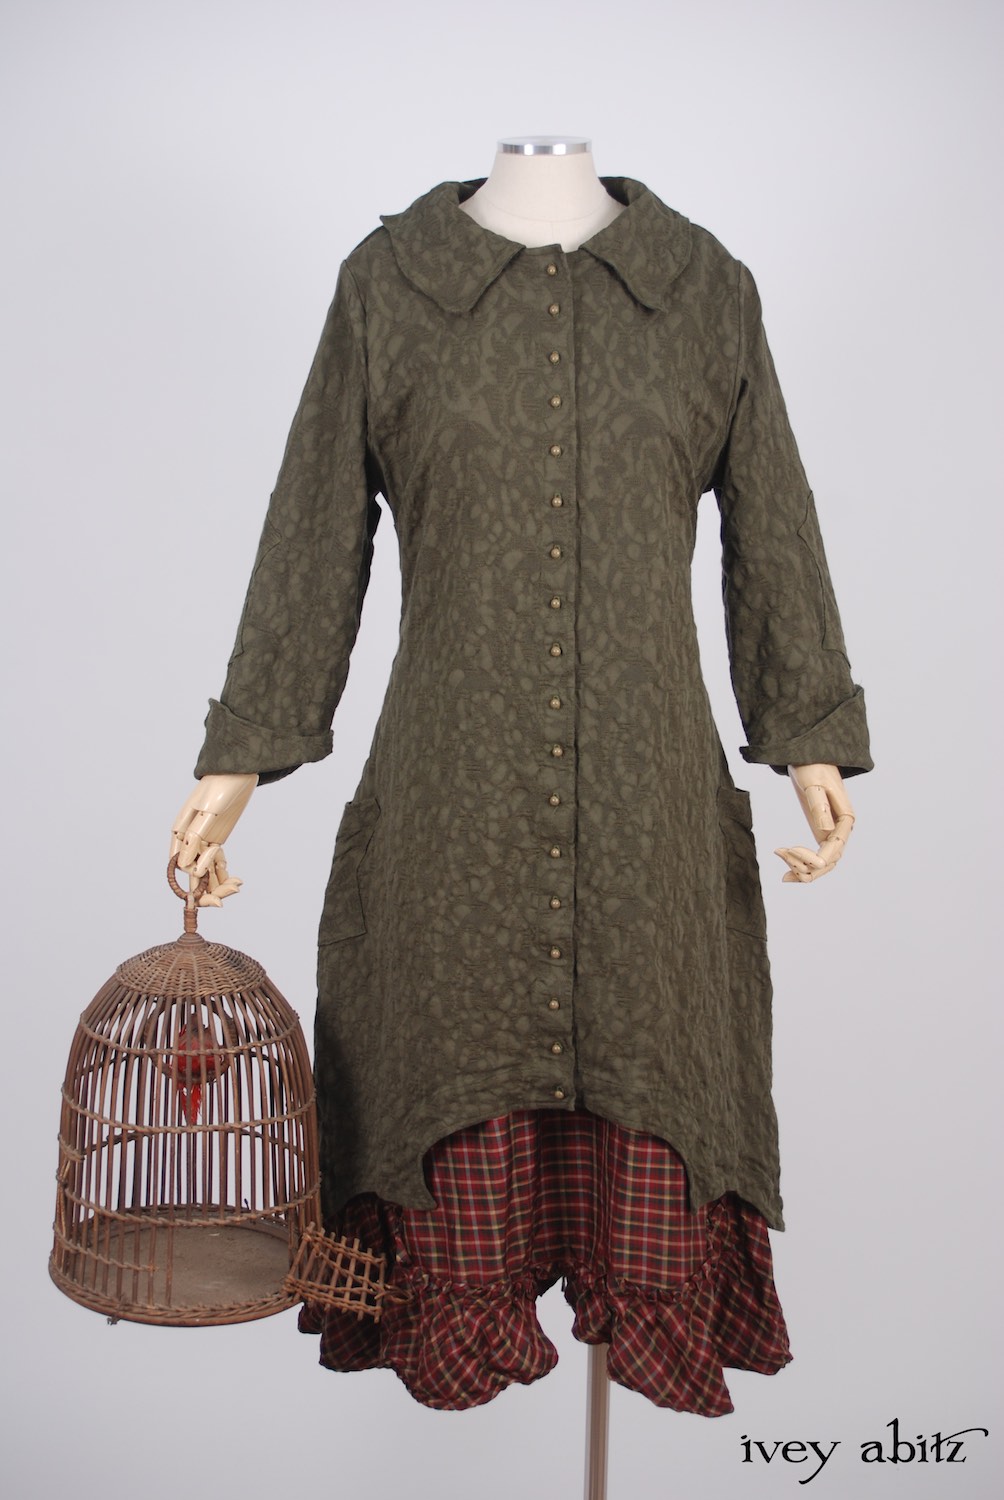 Ivey Abitz - Chittister Duster Coat in Morning Meadow Hemstitch Jacquard  - Tilbrook Frock in Peony Washed Plaid Silk, High Water Length